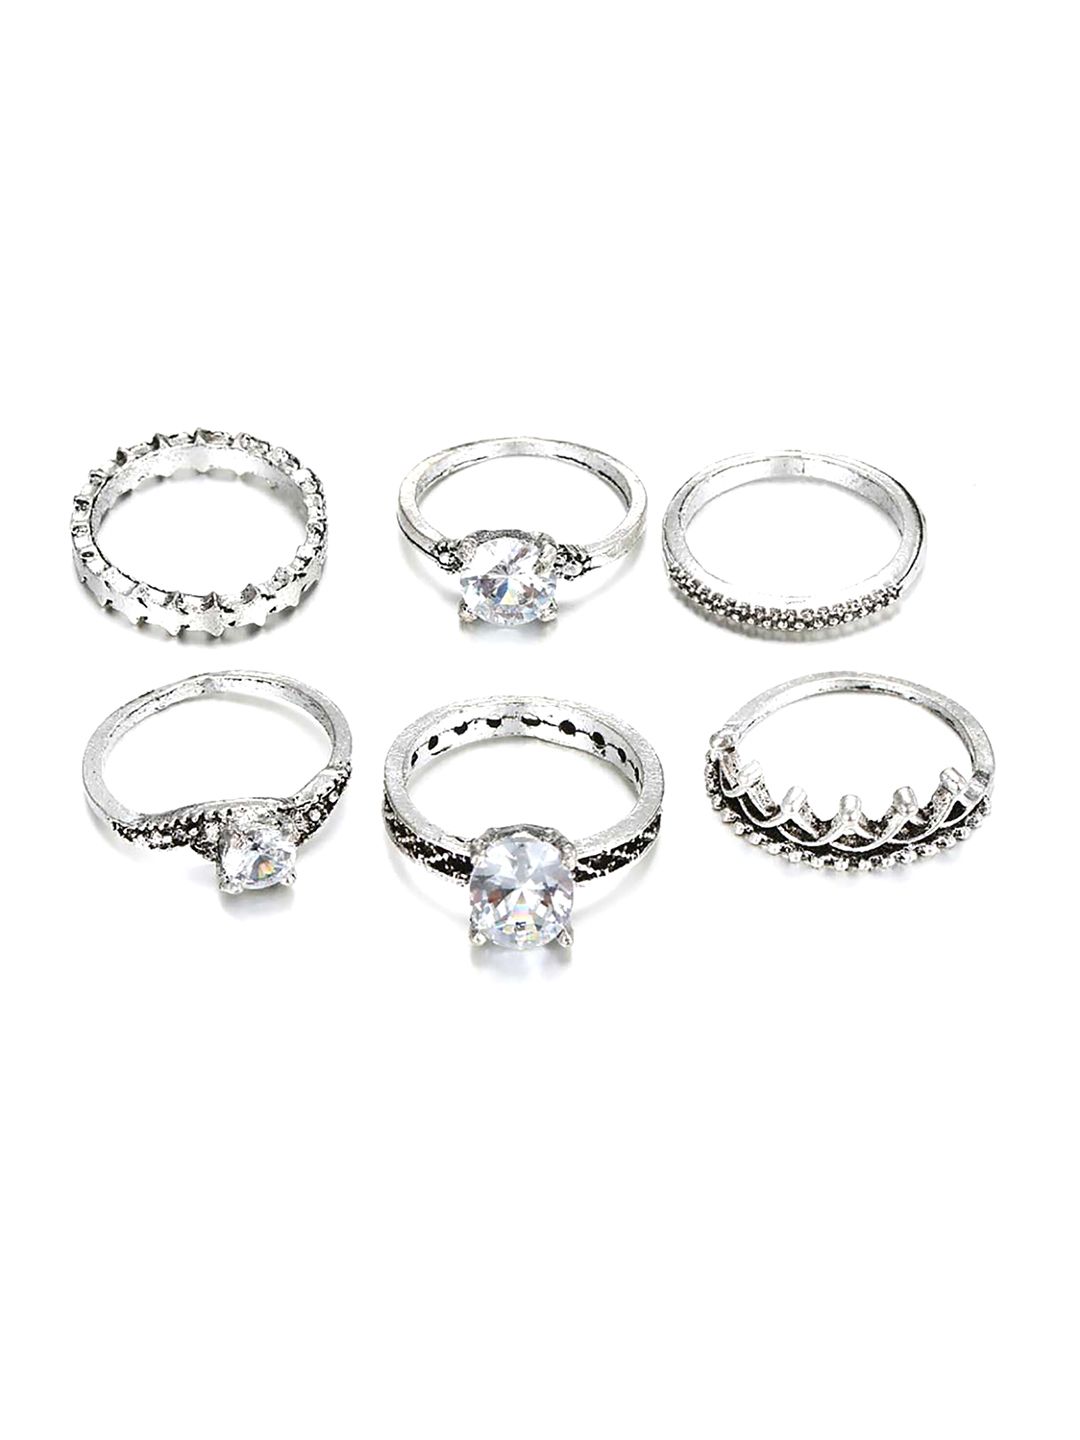 KACY Set Of 6 Sterling Silver Silver-Plated Cubic Zirconia Crystal Studded Finger Rings Price in India